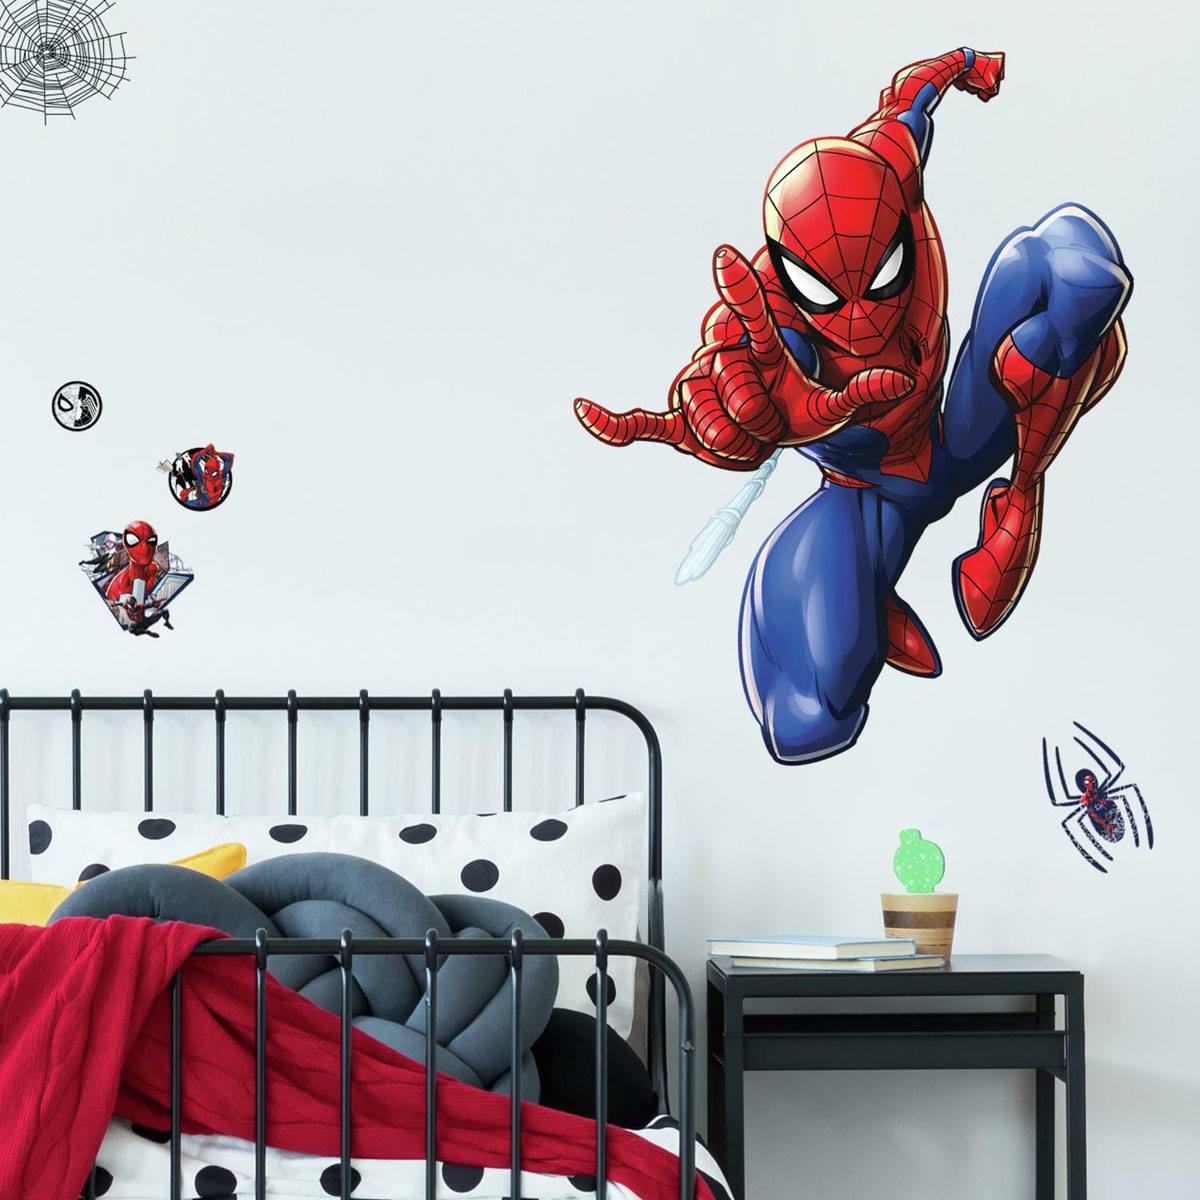 RoomMates(R) Spider-Man Peel & Stick Giant Wall Decals